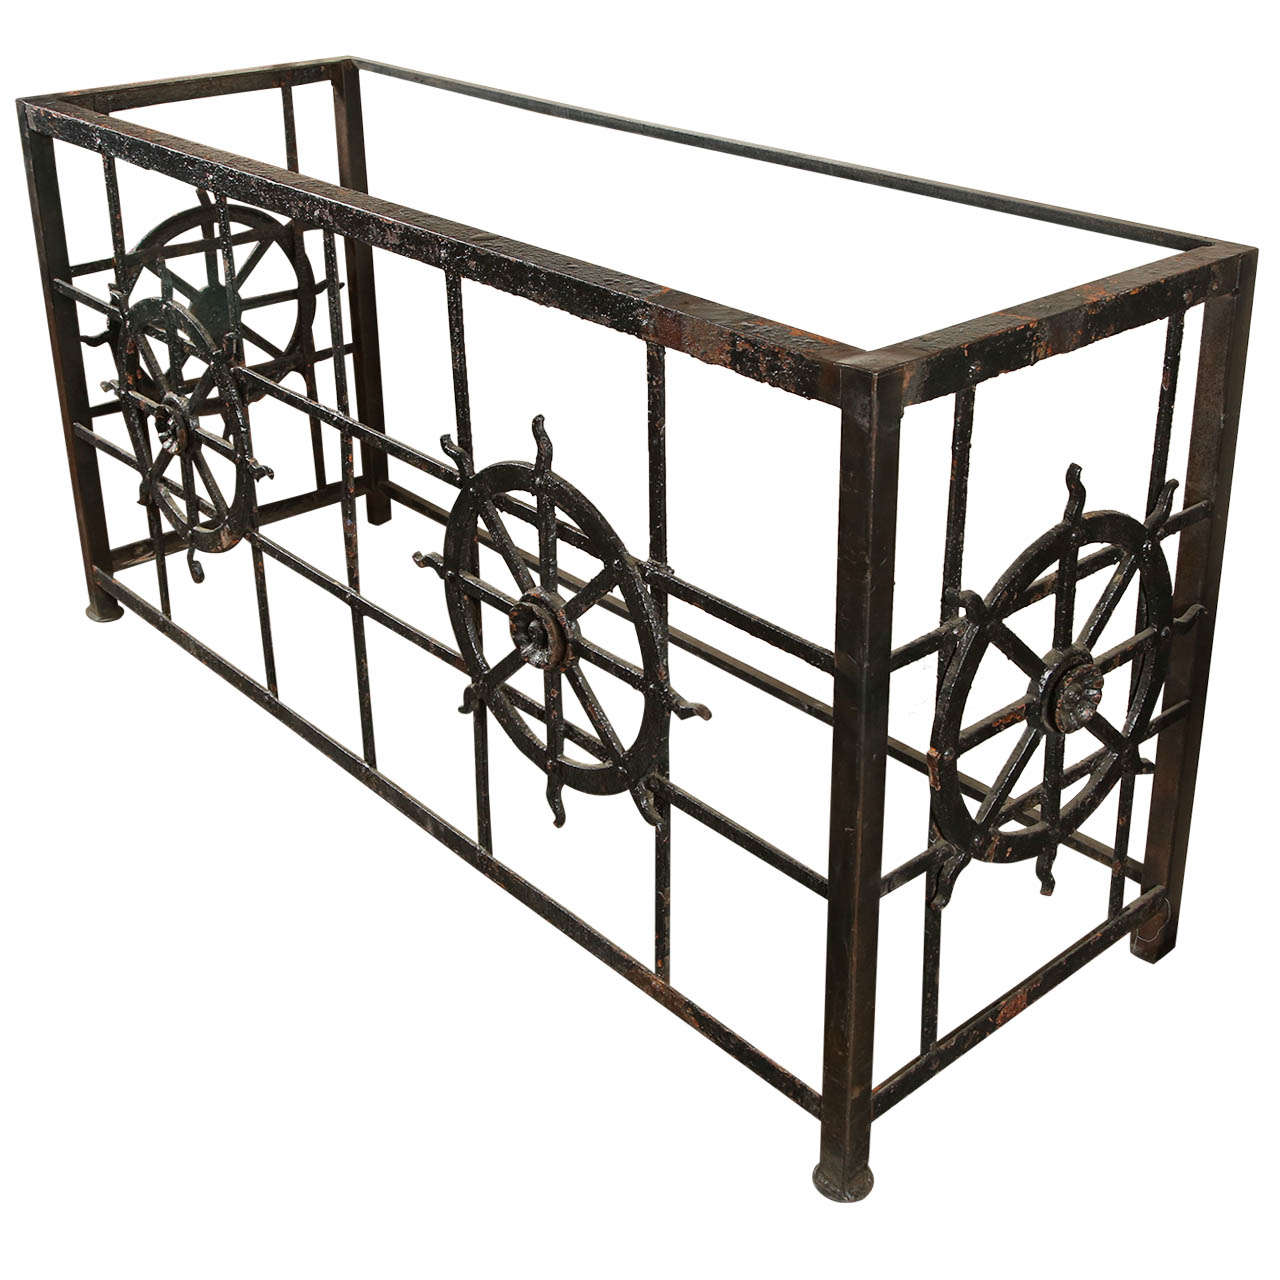 Cast Iron Side Table Made from Old Balcony